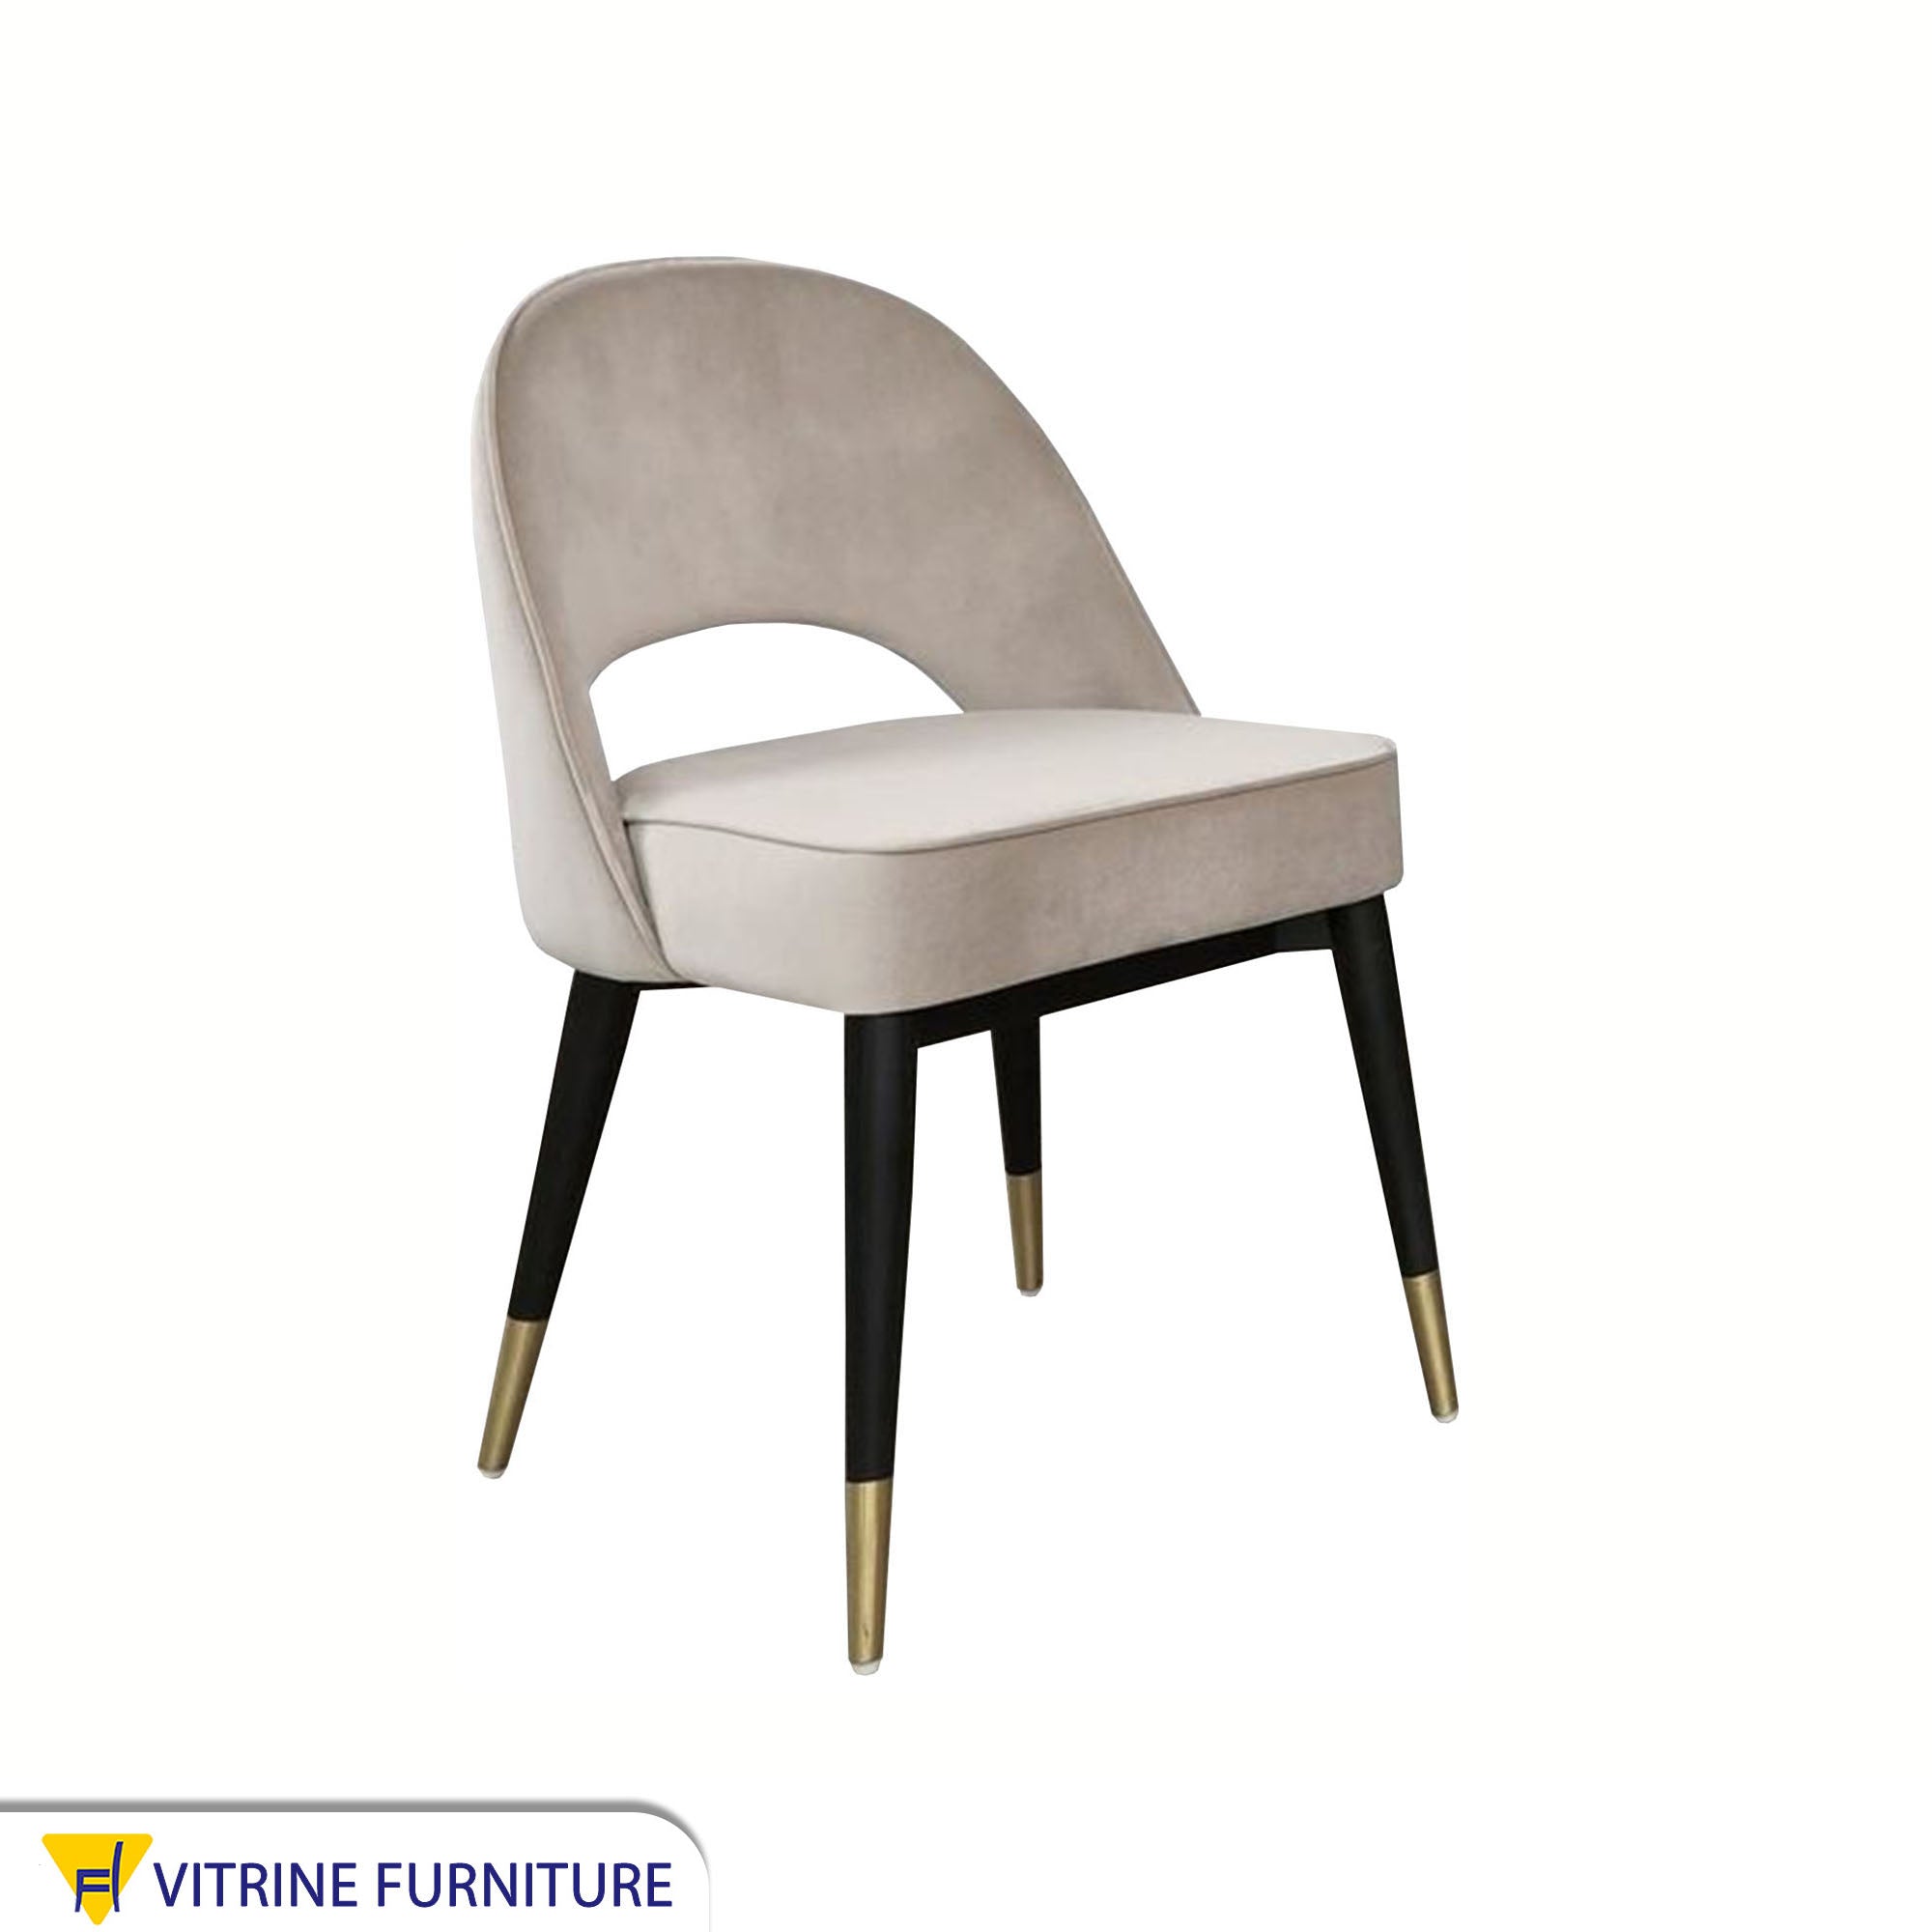 Upholstered beige chair